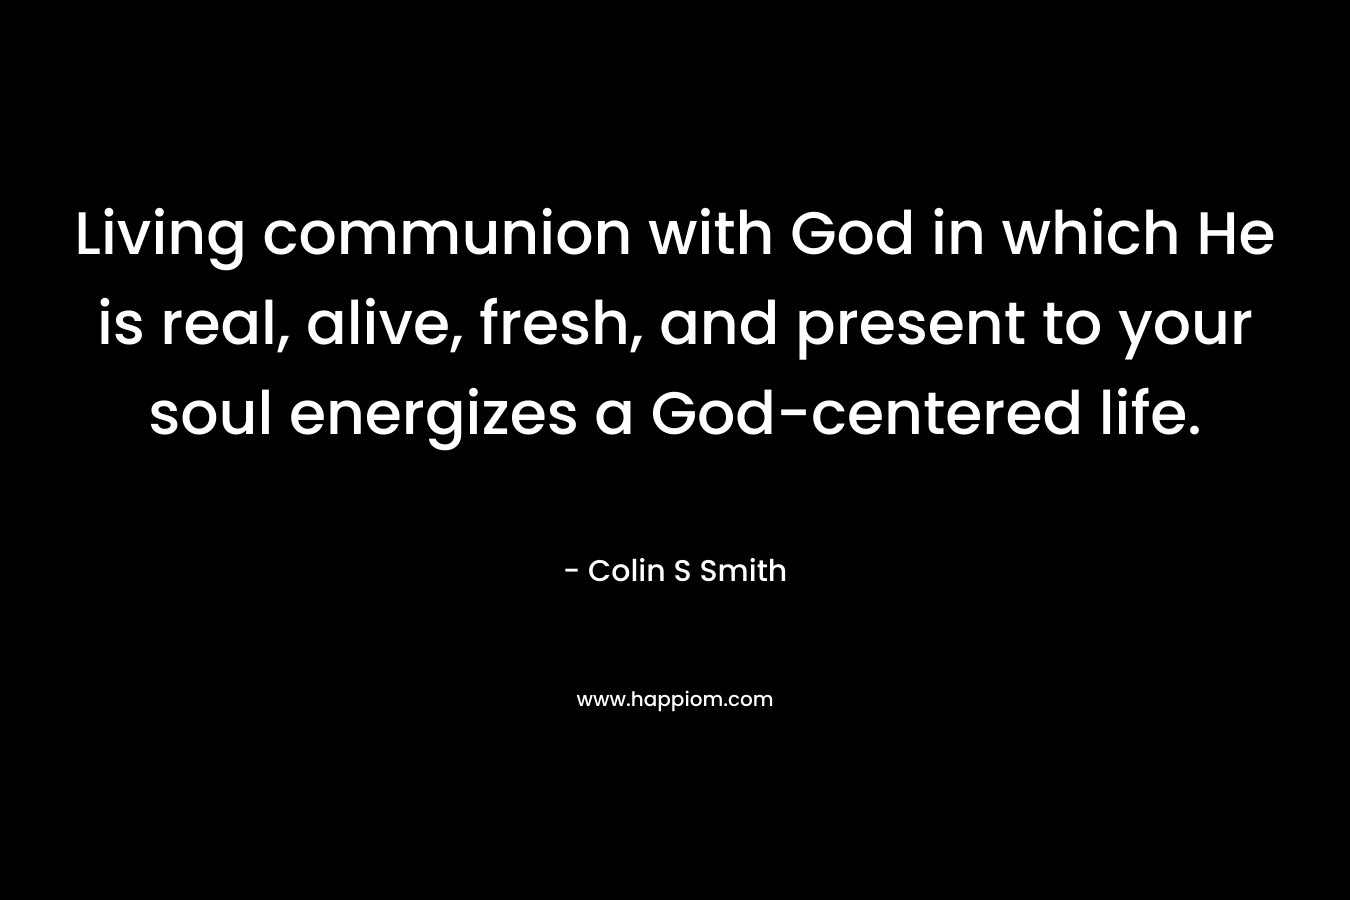 Living communion with God in which He is real, alive, fresh, and present to your soul energizes a God-centered life. – Colin S Smith